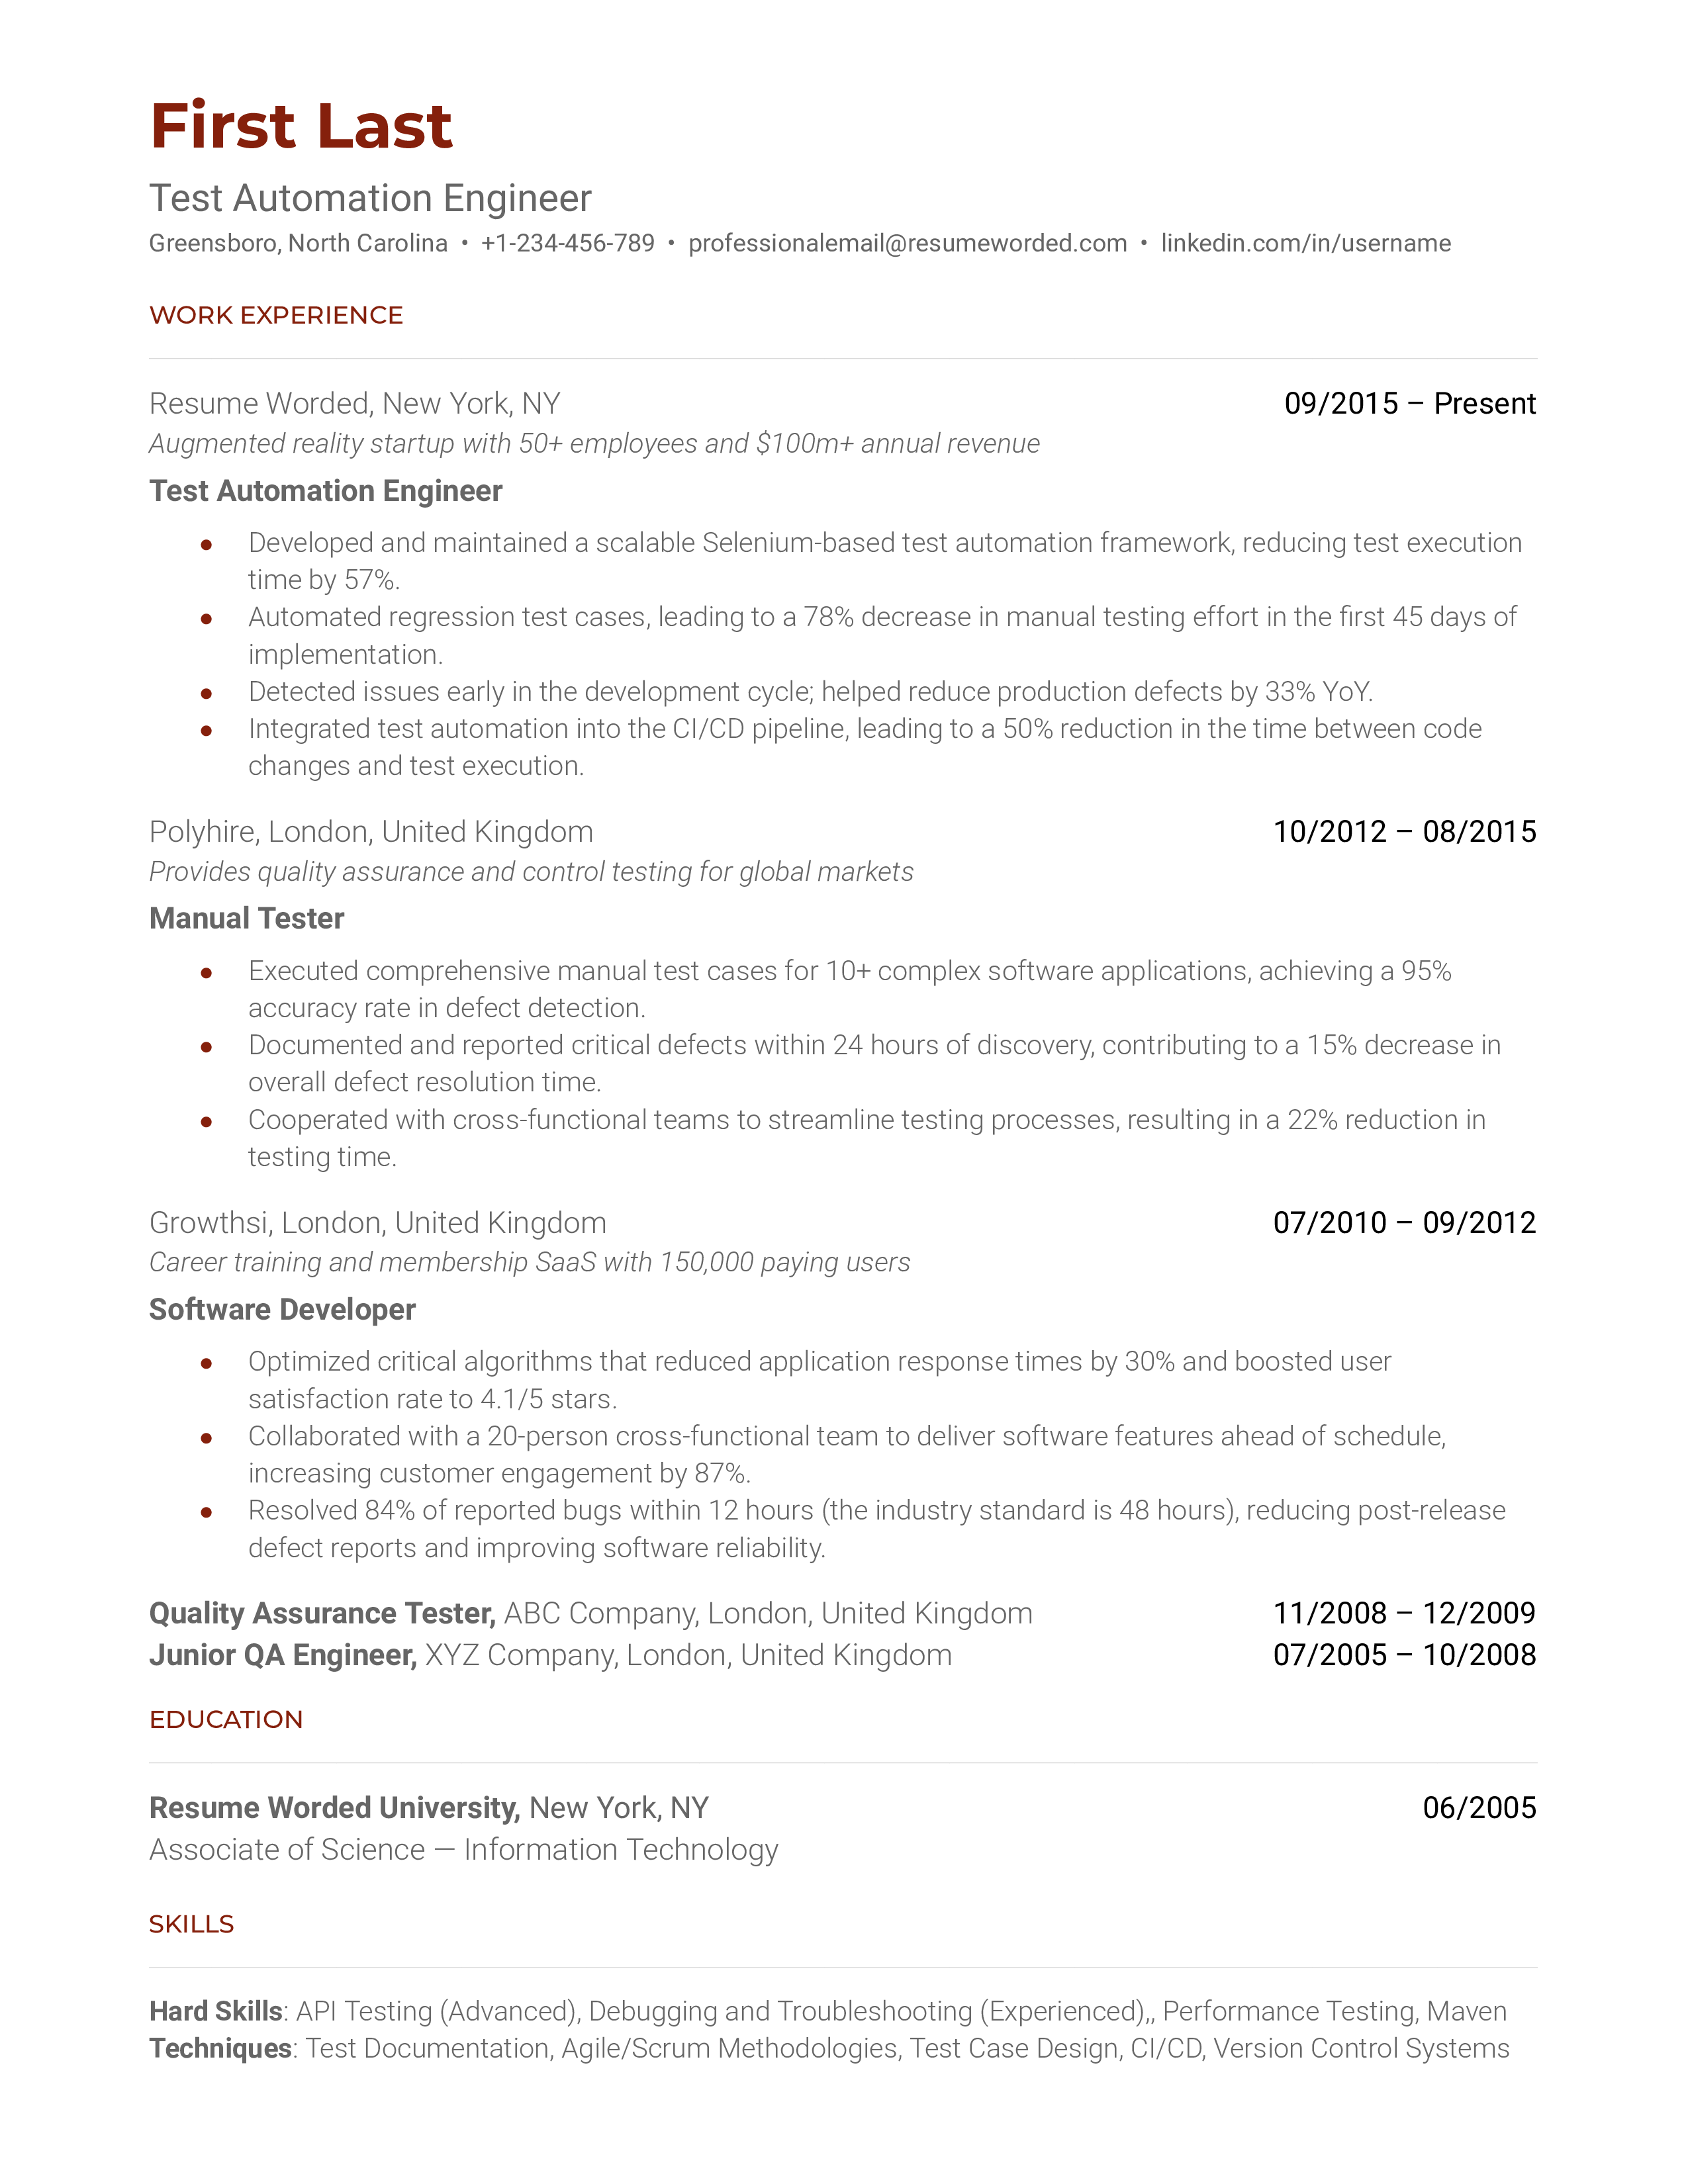 A comprehensive Test Automation Engineer resume showcasing technical and transferable skills.